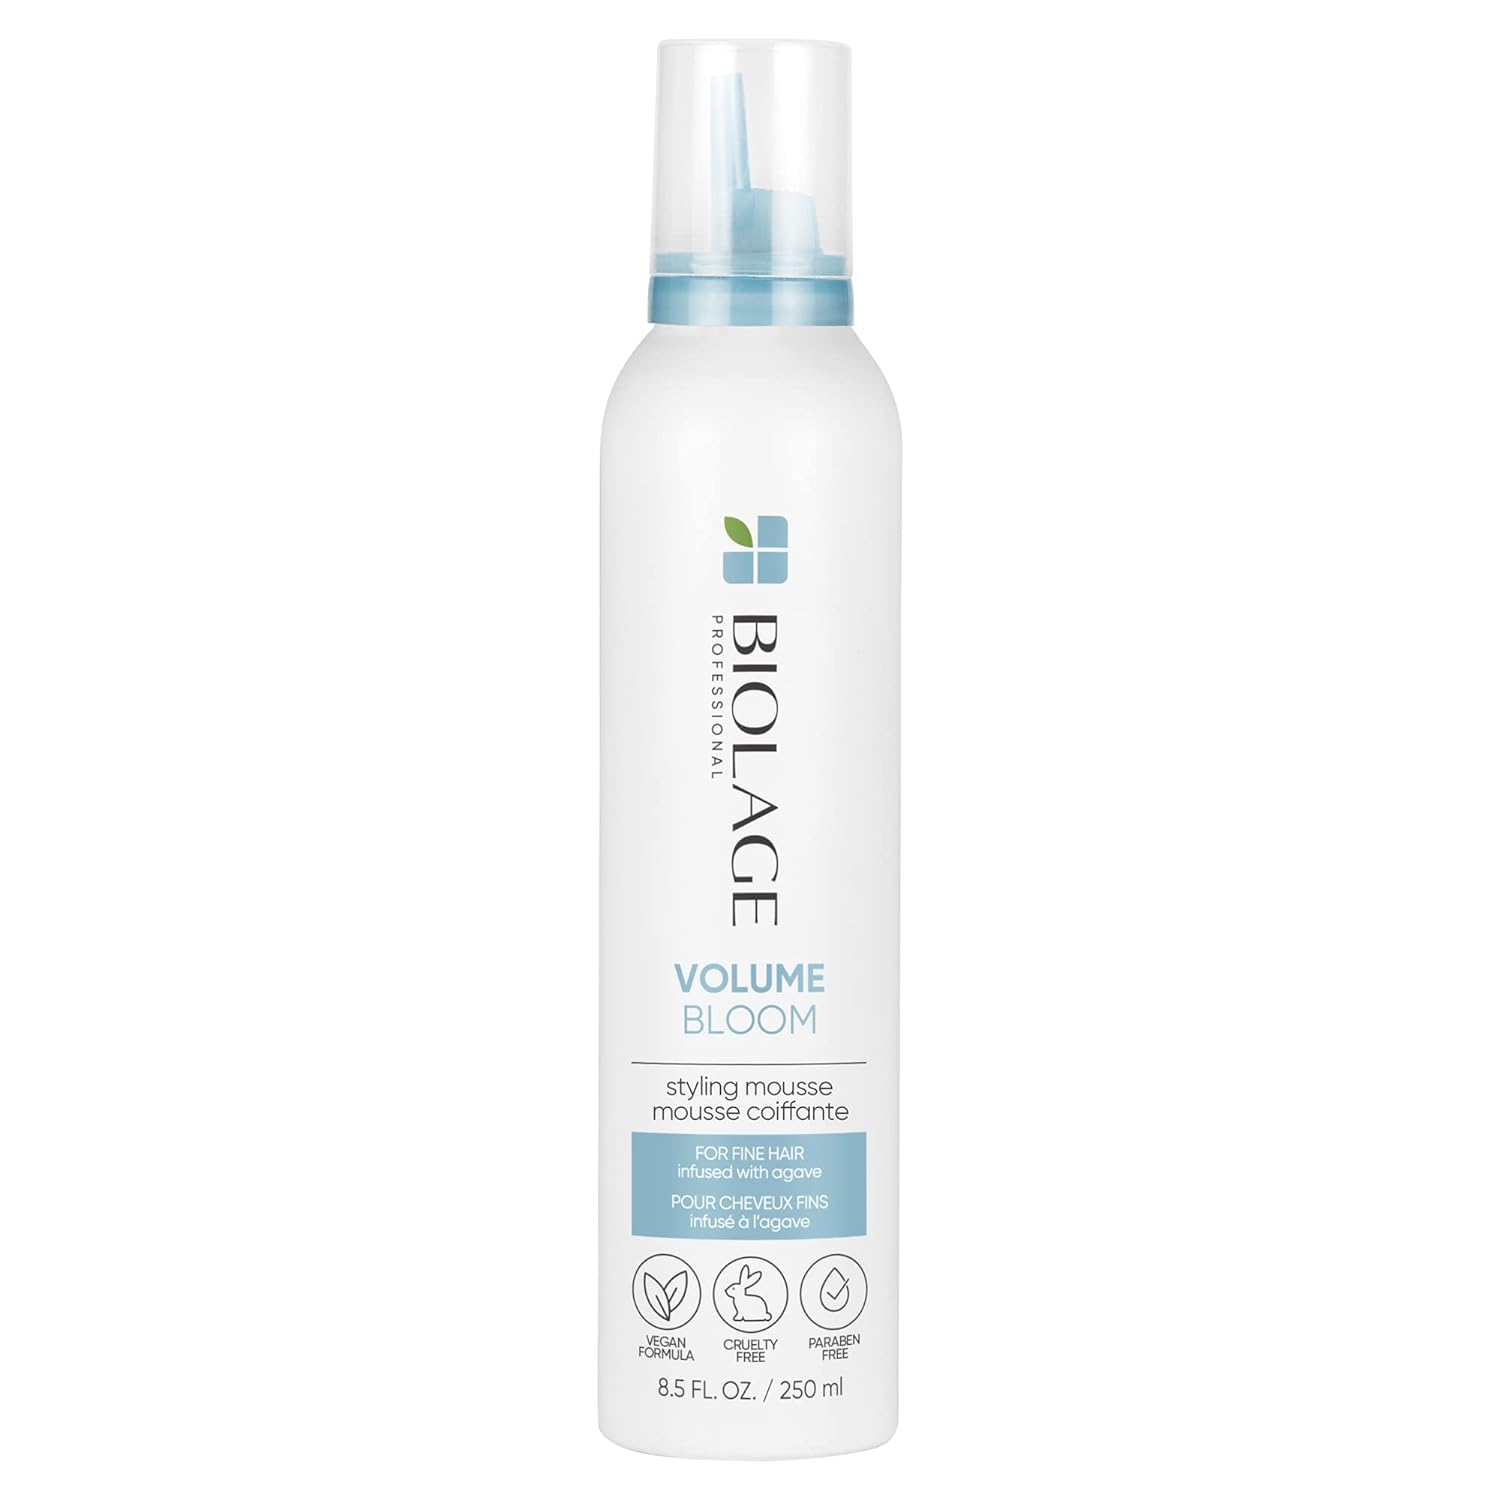 Biolage Styling Whipped Volume Mousse | Provides Body, Control & Shine Leaving Hair With Natural Softness | Medium Hold | Paraben-Free | Vegan | 8.5 Oz. | 8.5 Fl. Oz